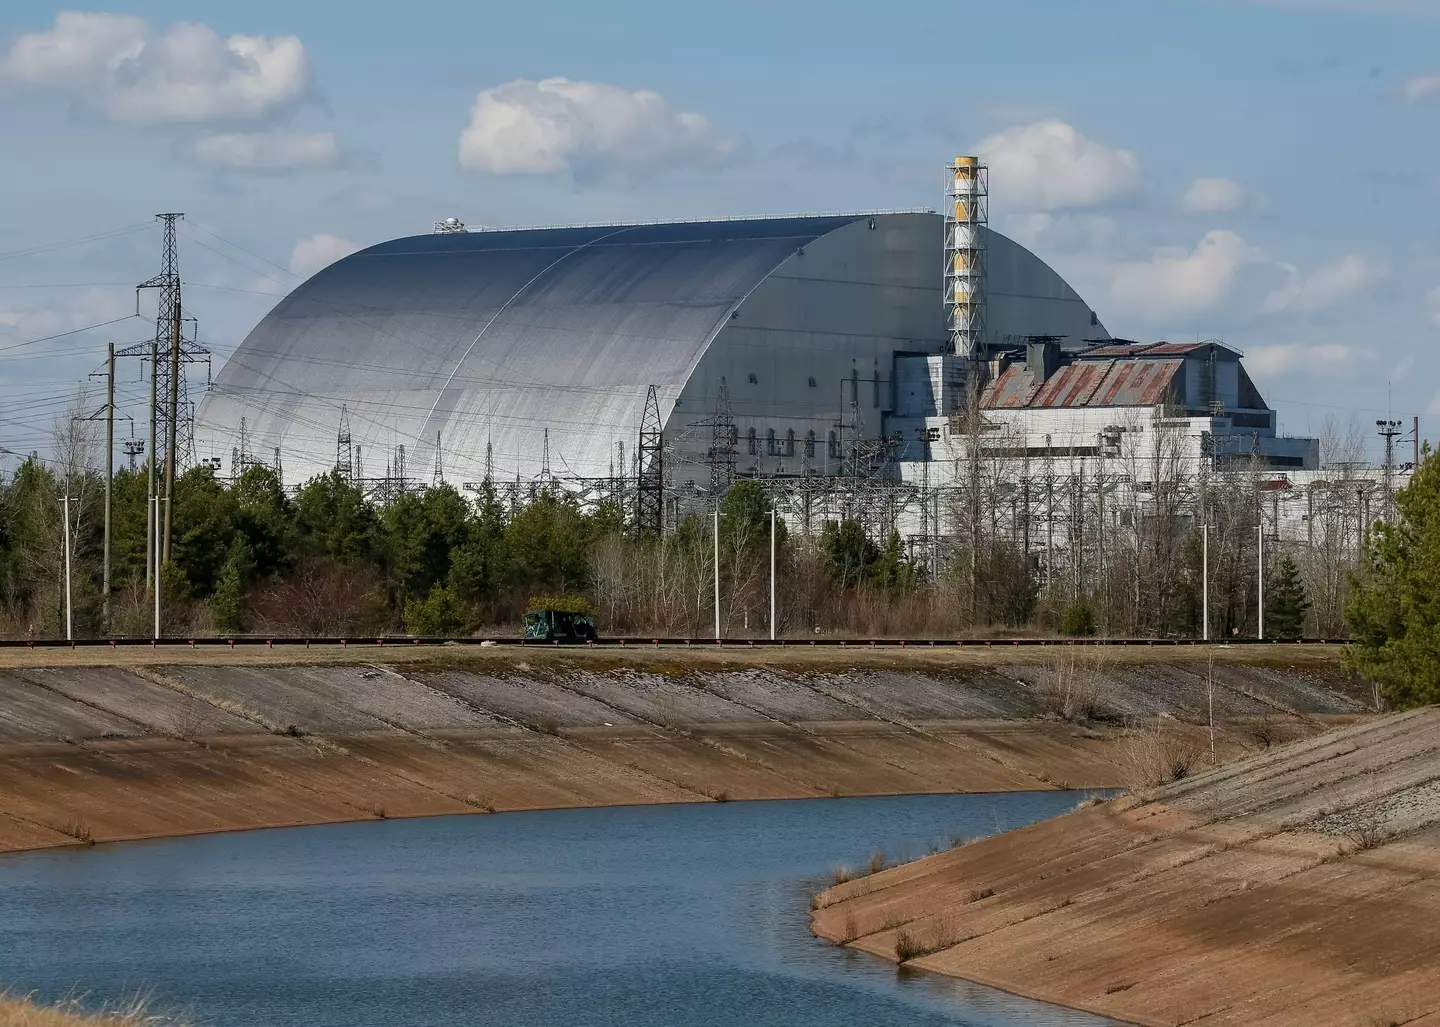 The Chernobyl Power Plant continues to be radioactive more than 30 years on from the accident.